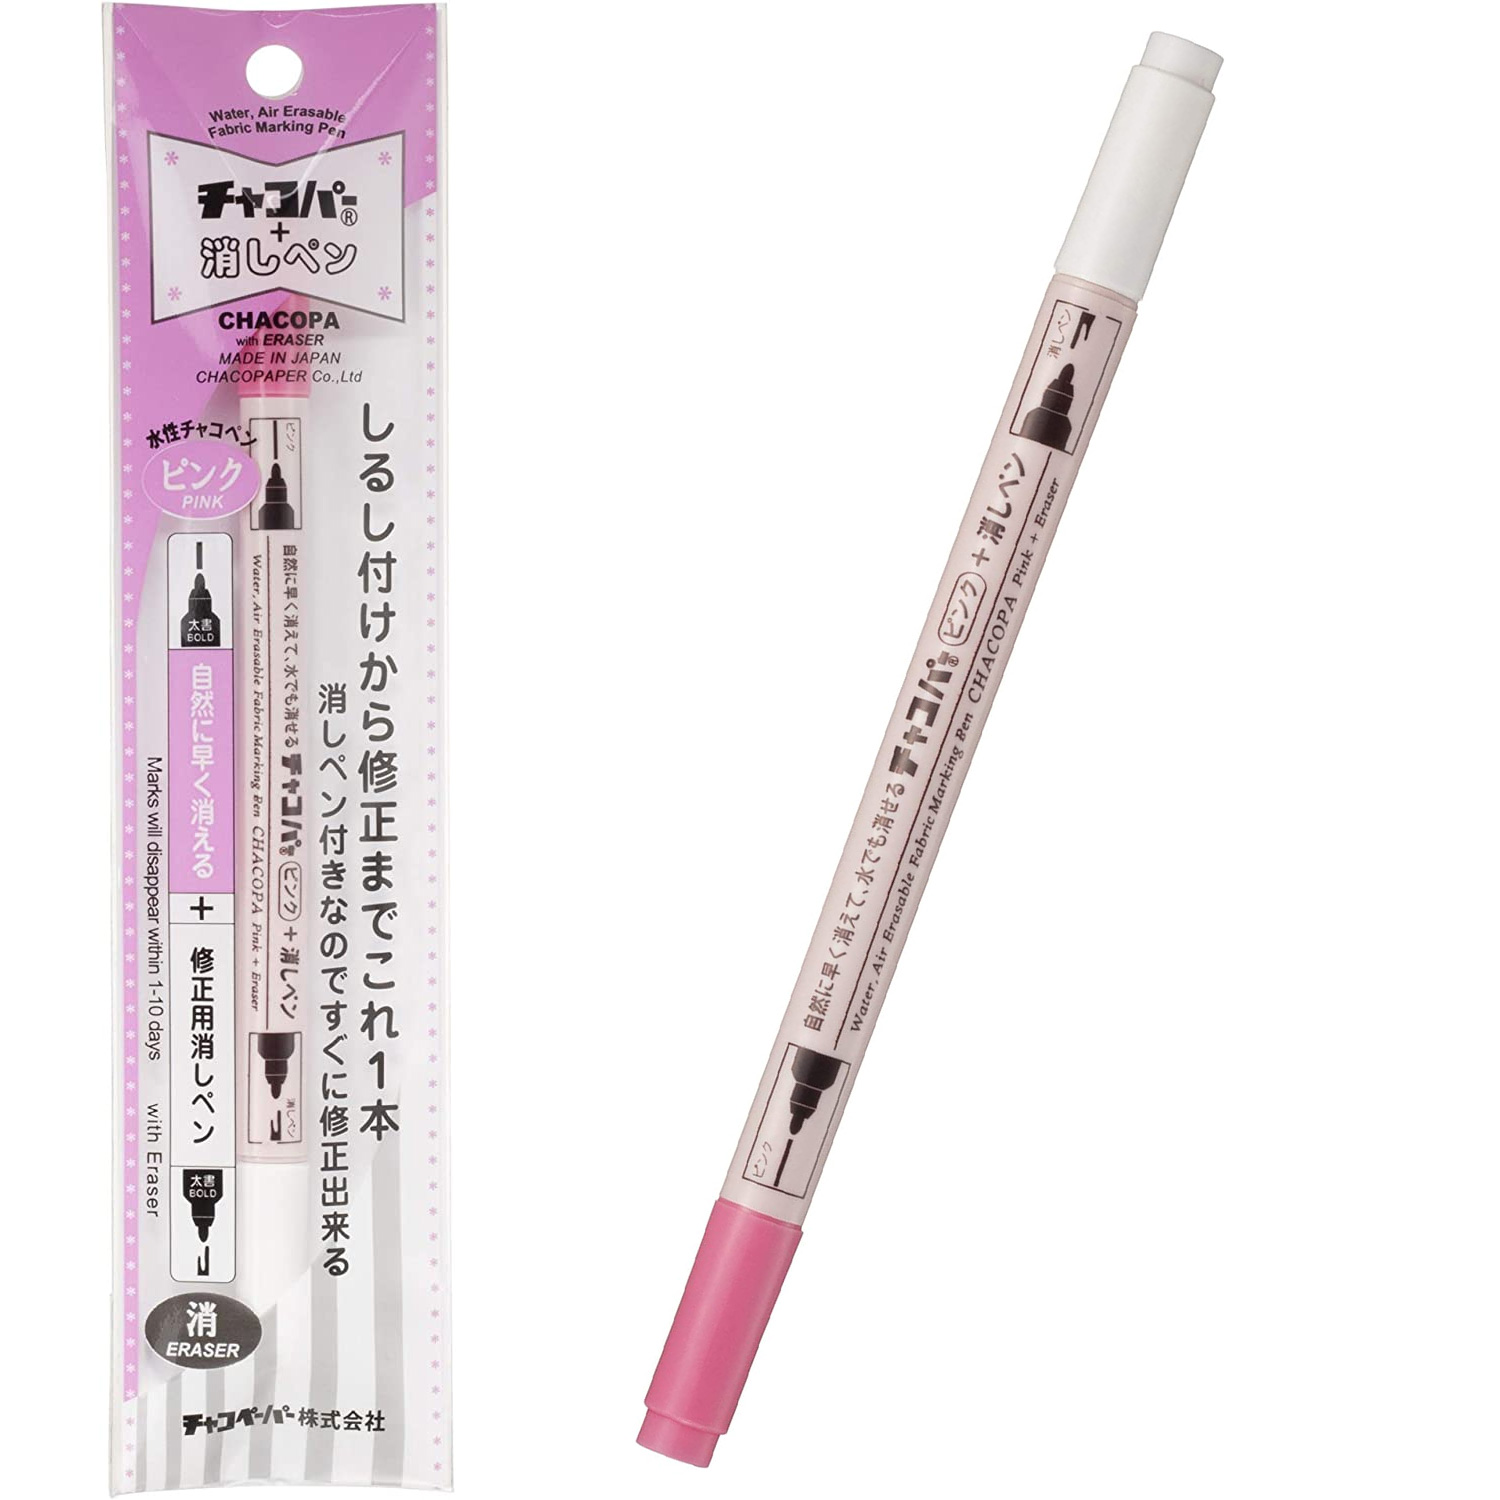 F11-PK Water-based Chaco Pen Chacopa + Eraser Pen pink", length 14cm (pcs)